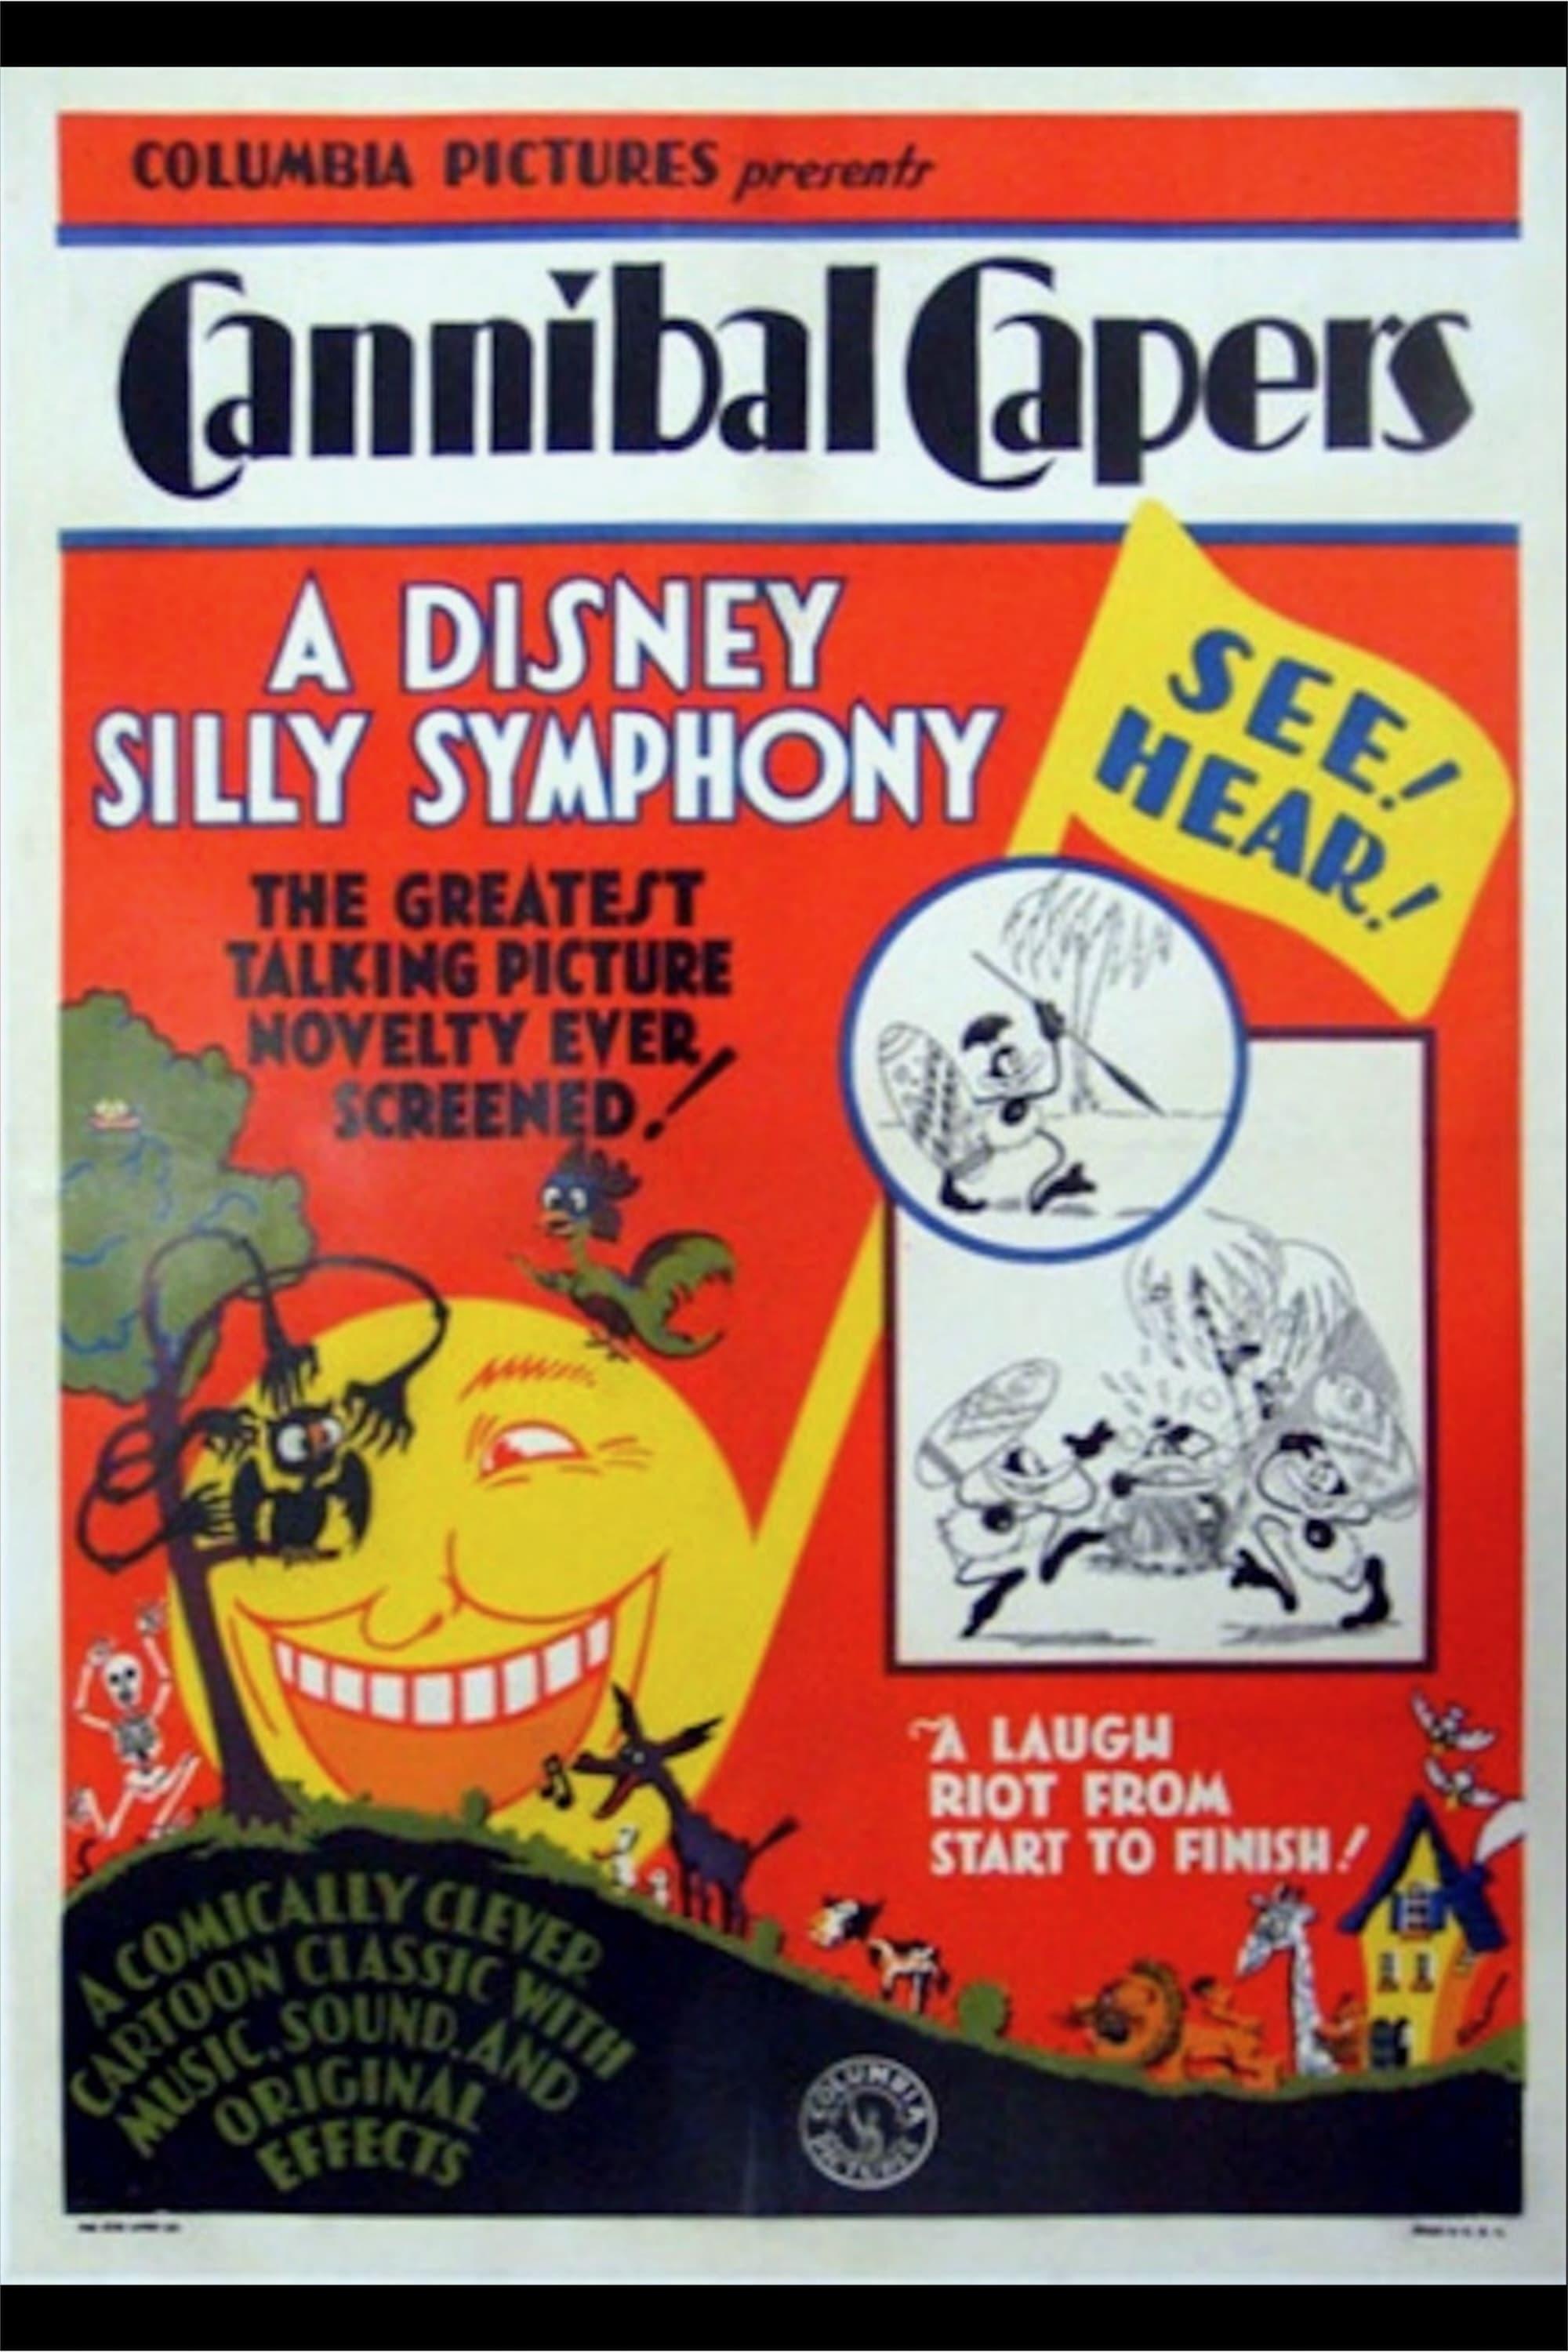 Cannibal Capers poster